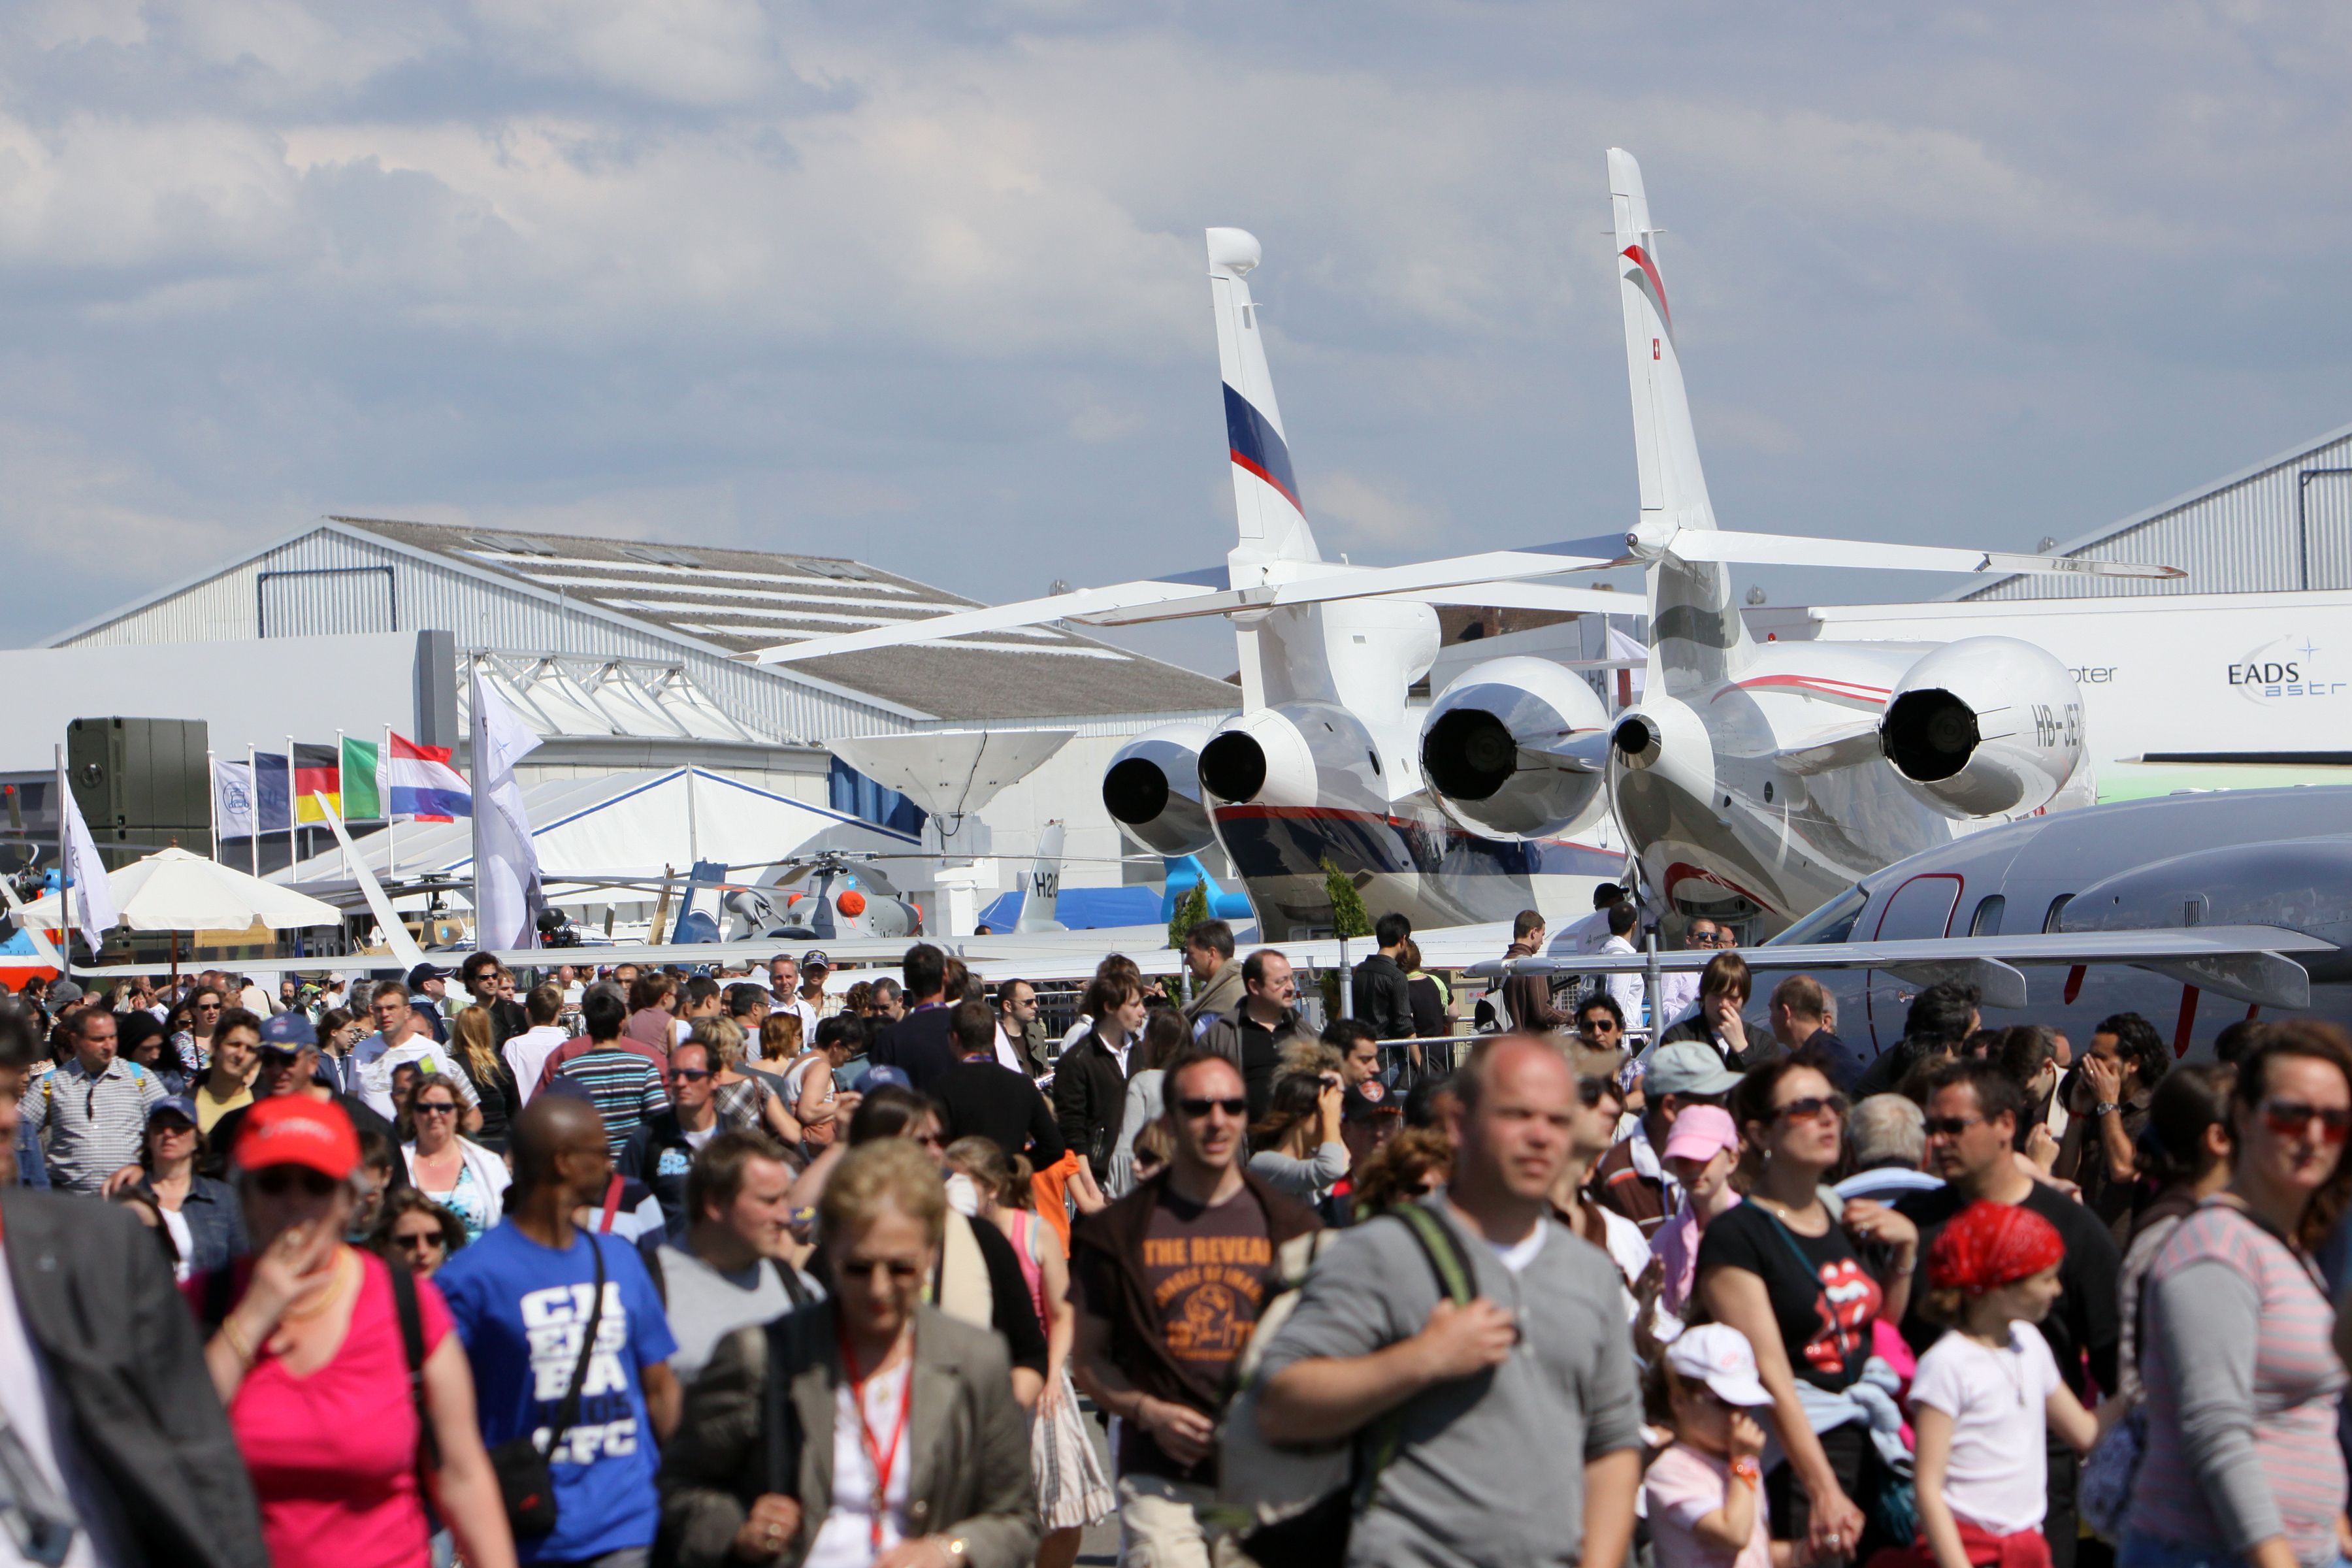 Many people and aircraft at the Paris Air Show.